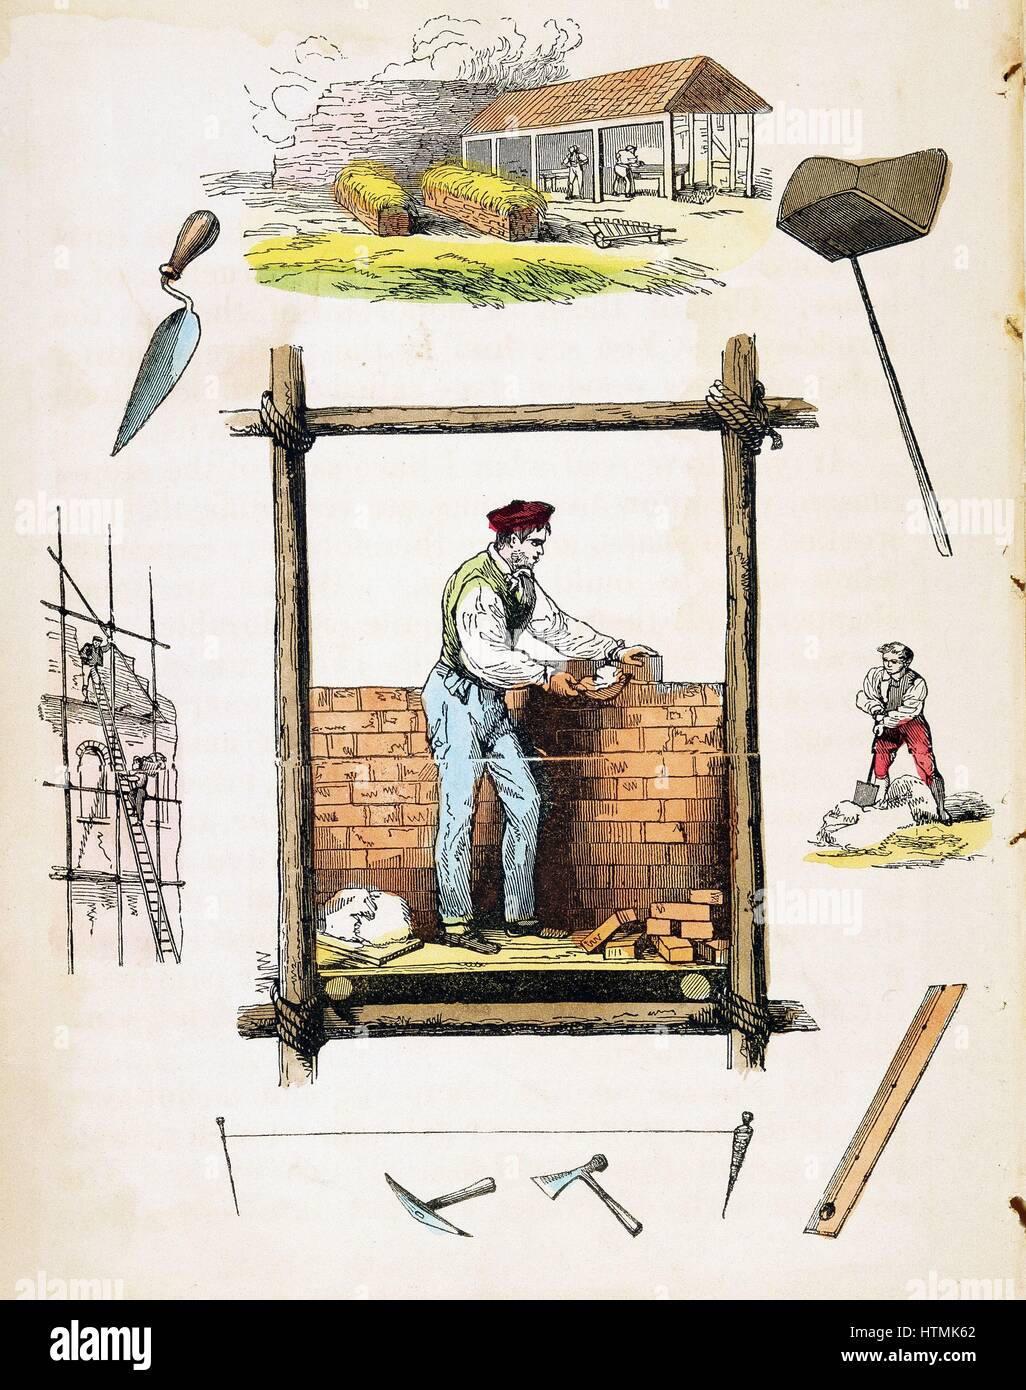 Bricklayer working on wooden scaffold. Top: Brickyard. Right: Miixing mortar. Hand-coloured wood engraving from children's book, London, c1845 Stock Photo